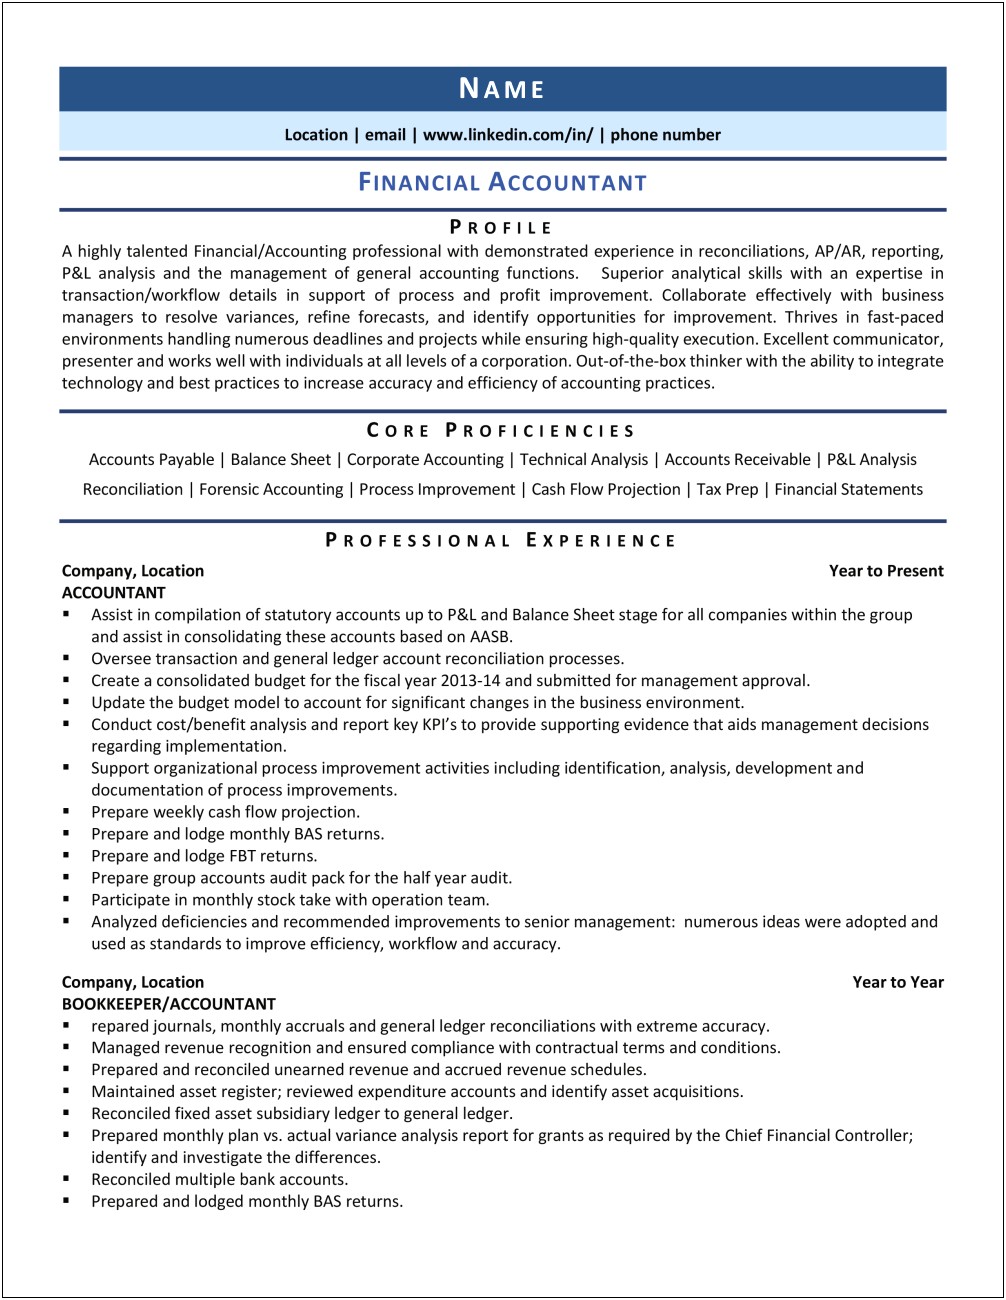 Sample Resume For Finance And Accounting Manager